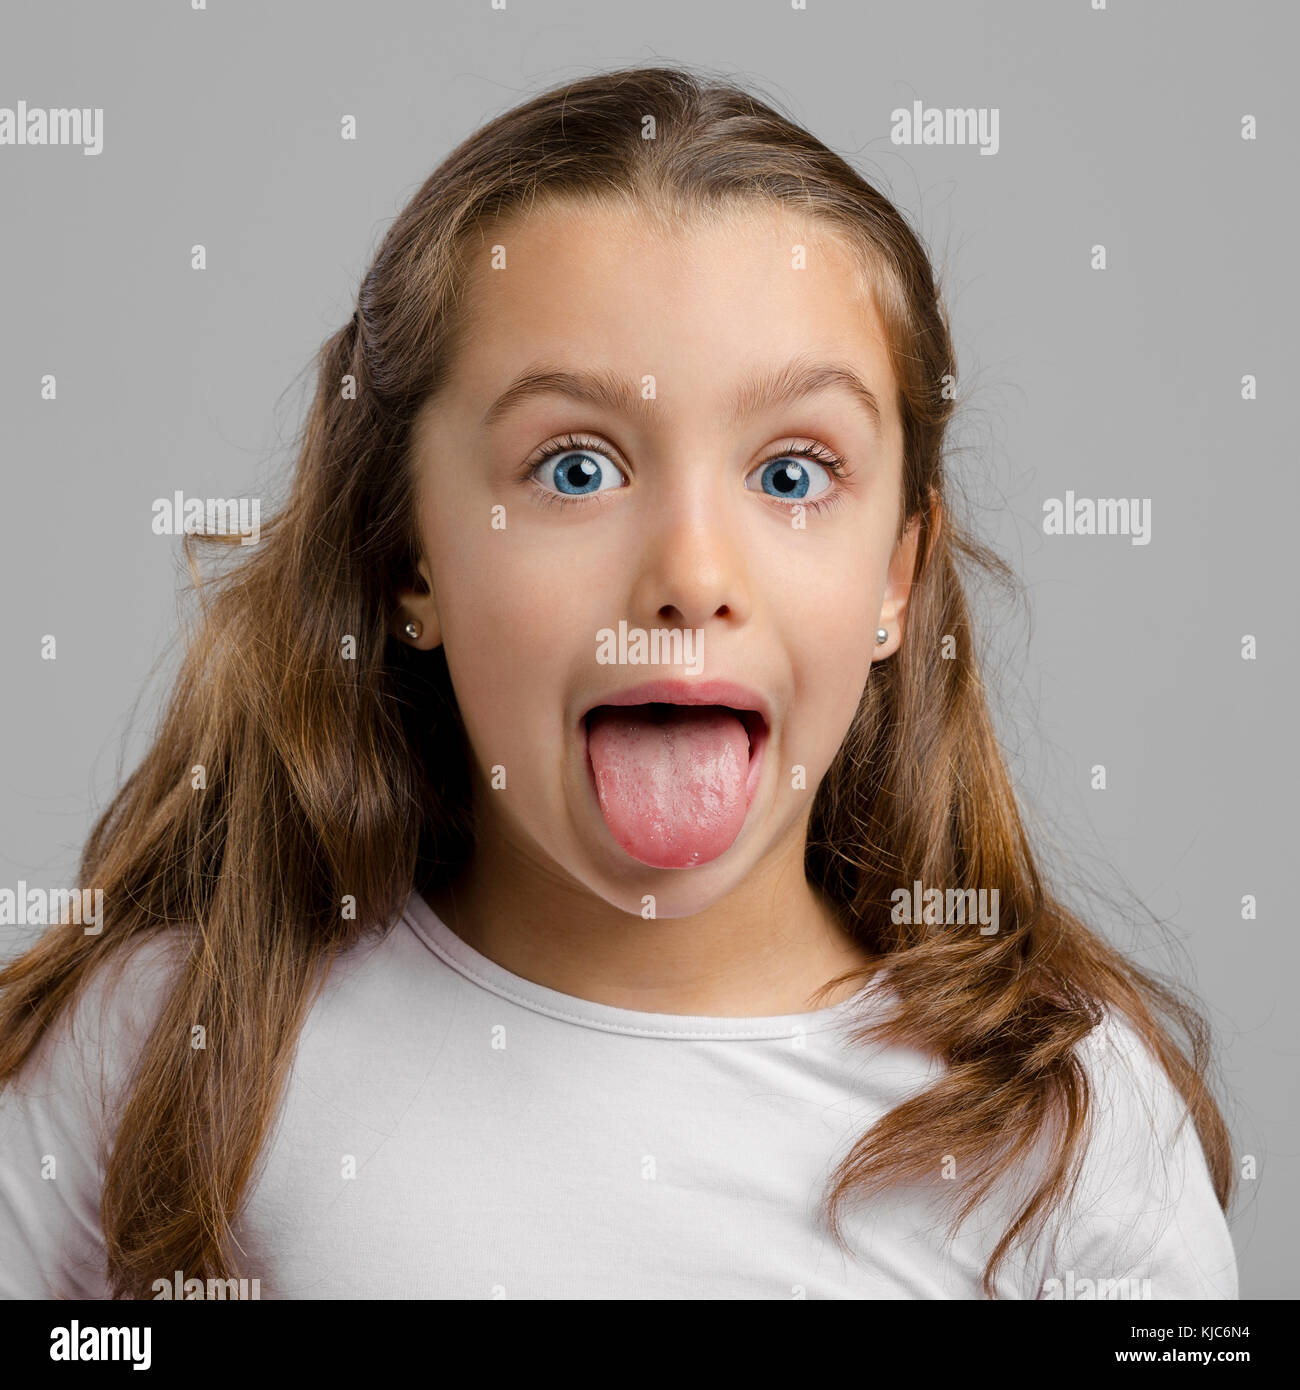 Portrait of a little girl with her tongue out Stock Photo